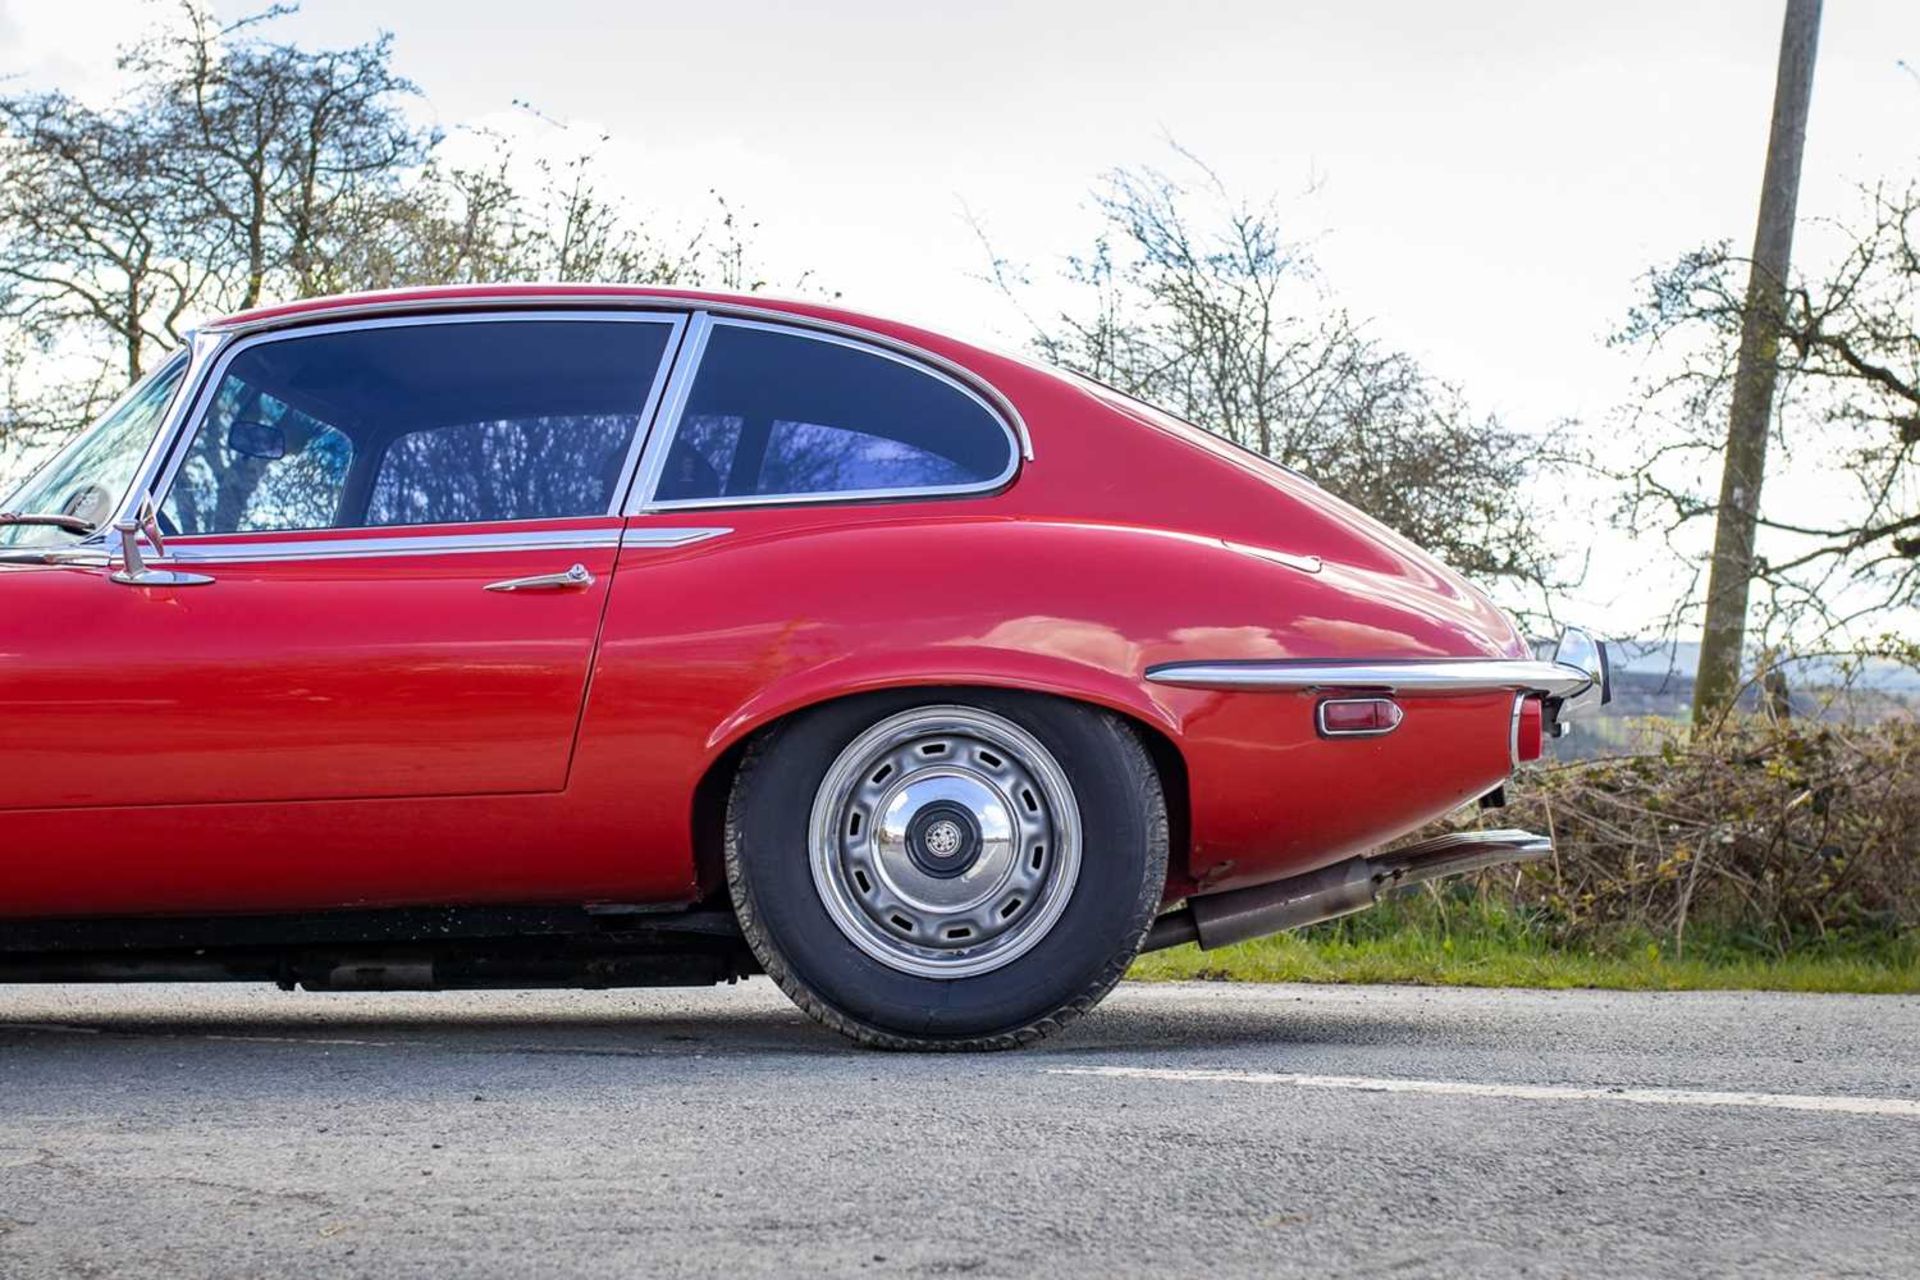 1973 Jaguar E-Type Coupe 5.3 V12 Three owners from new - Image 19 of 79